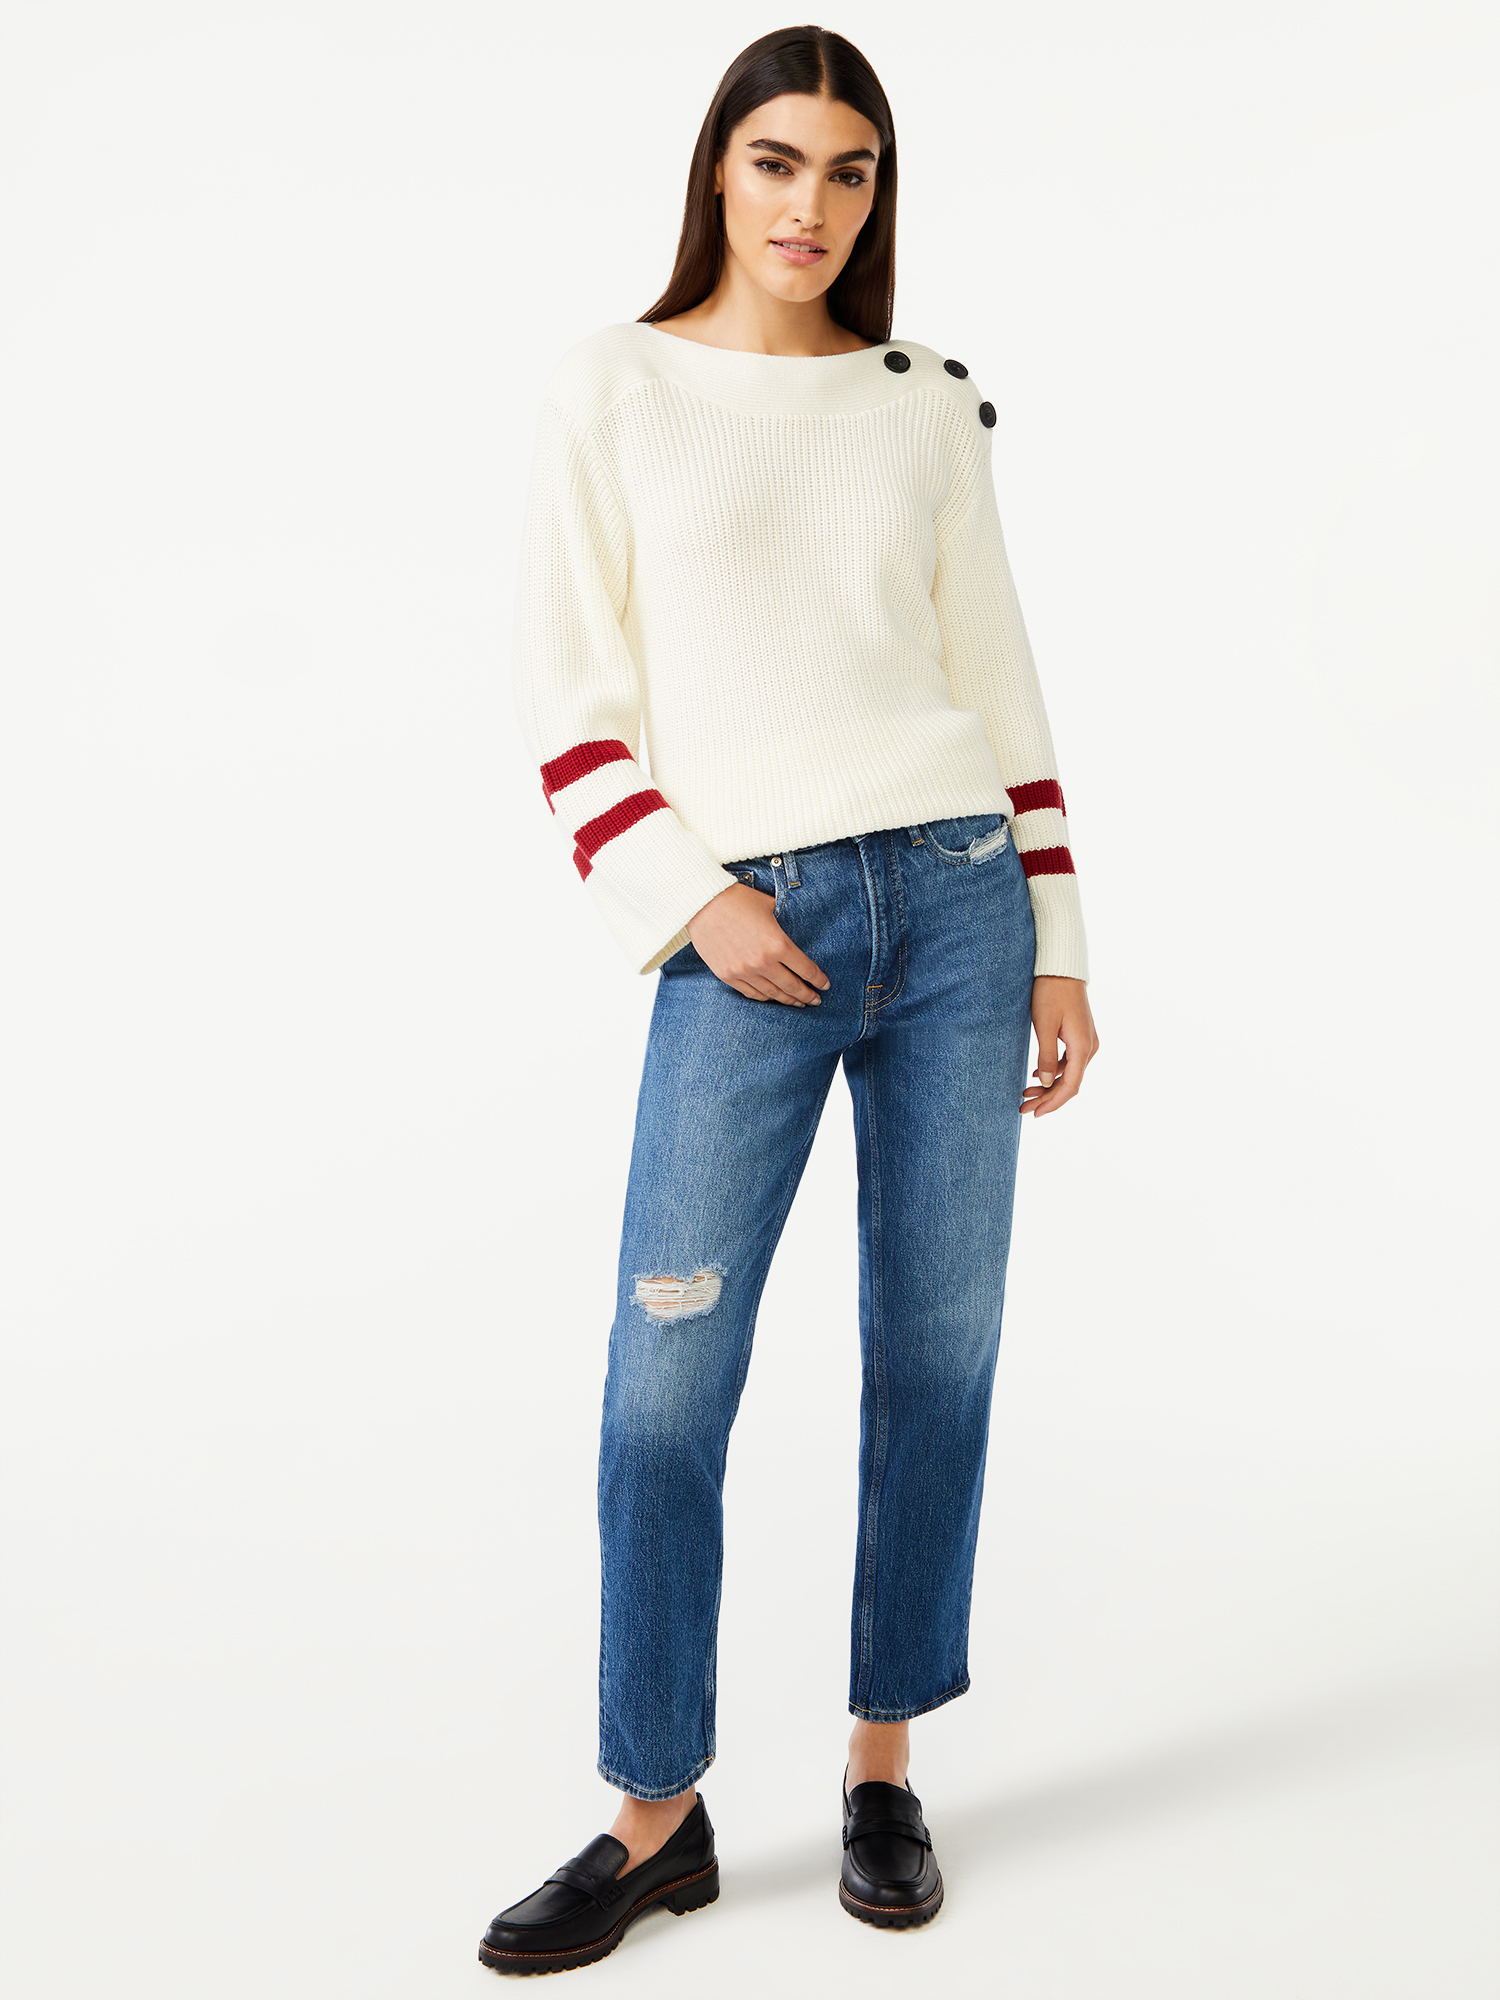 Free Assembly Women’s Button Shoulder Sweater - image 2 of 6